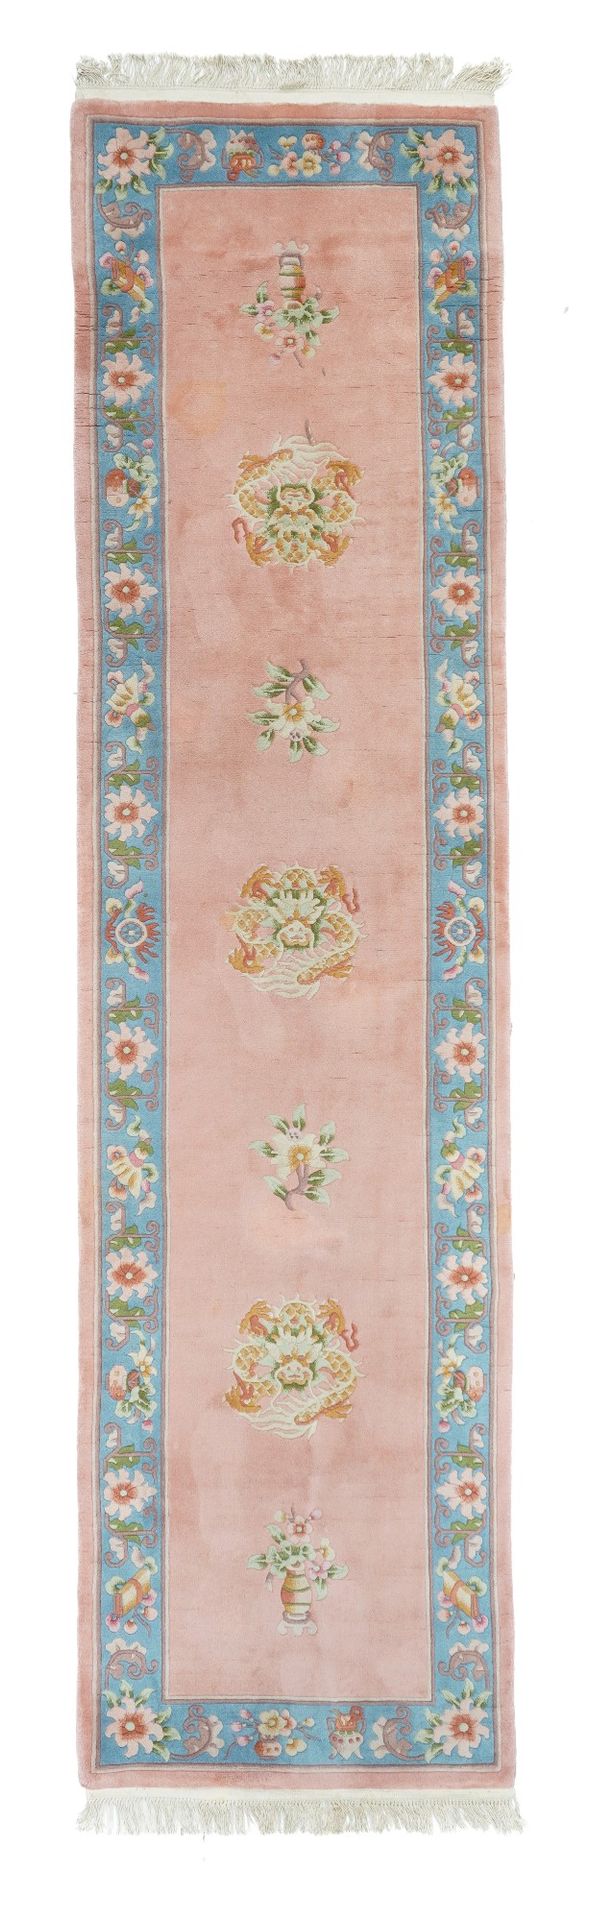 Null Chinese Long Rug, 2'10" x 11' ( 0.86 x 3.35 M )